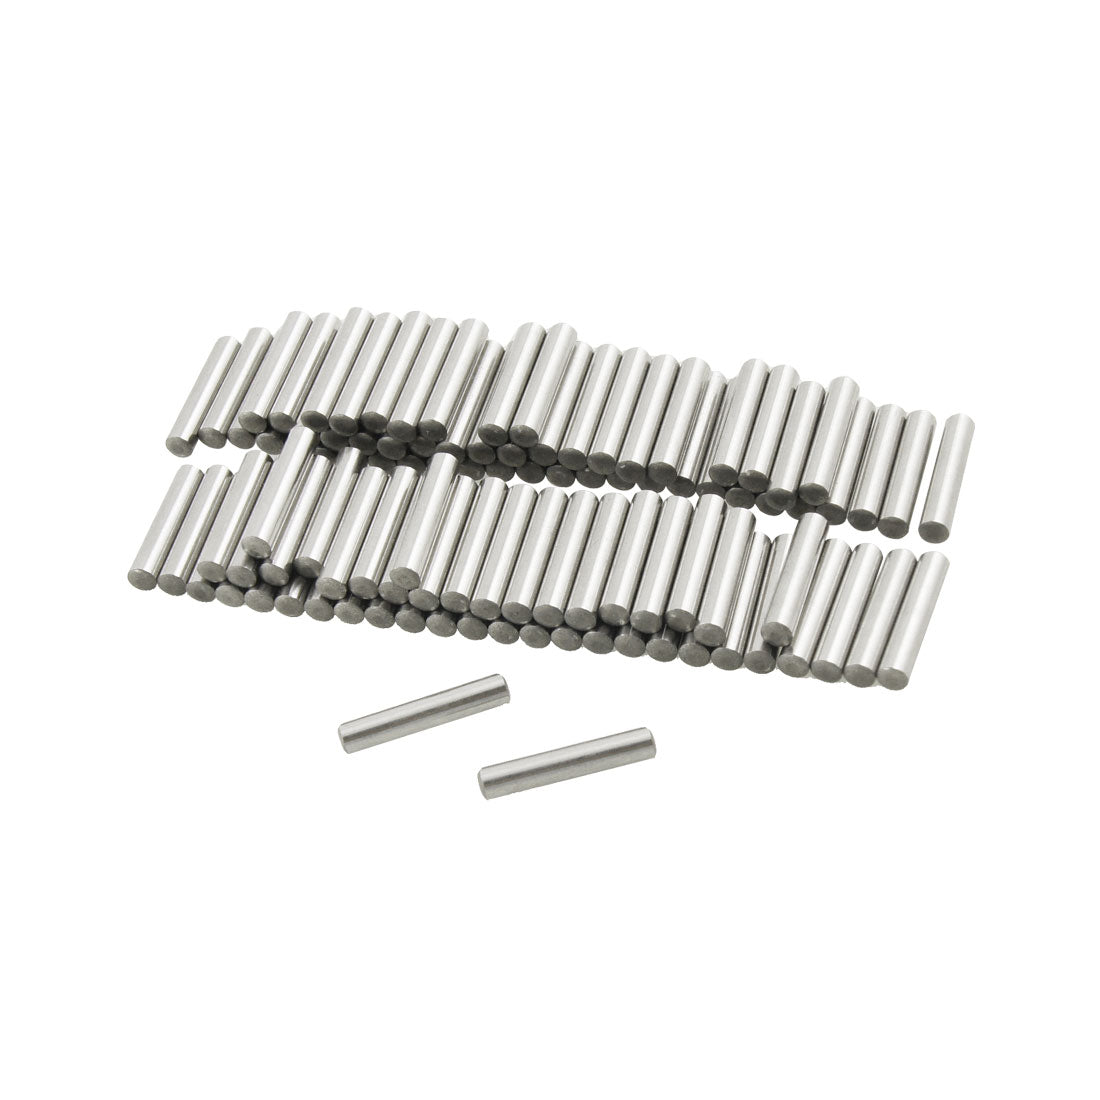 uxcell Uxcell 100 Pcs Stainless Steel 2.45mm x 15.8mm Cylinder Dowel Pins Fasten Elements